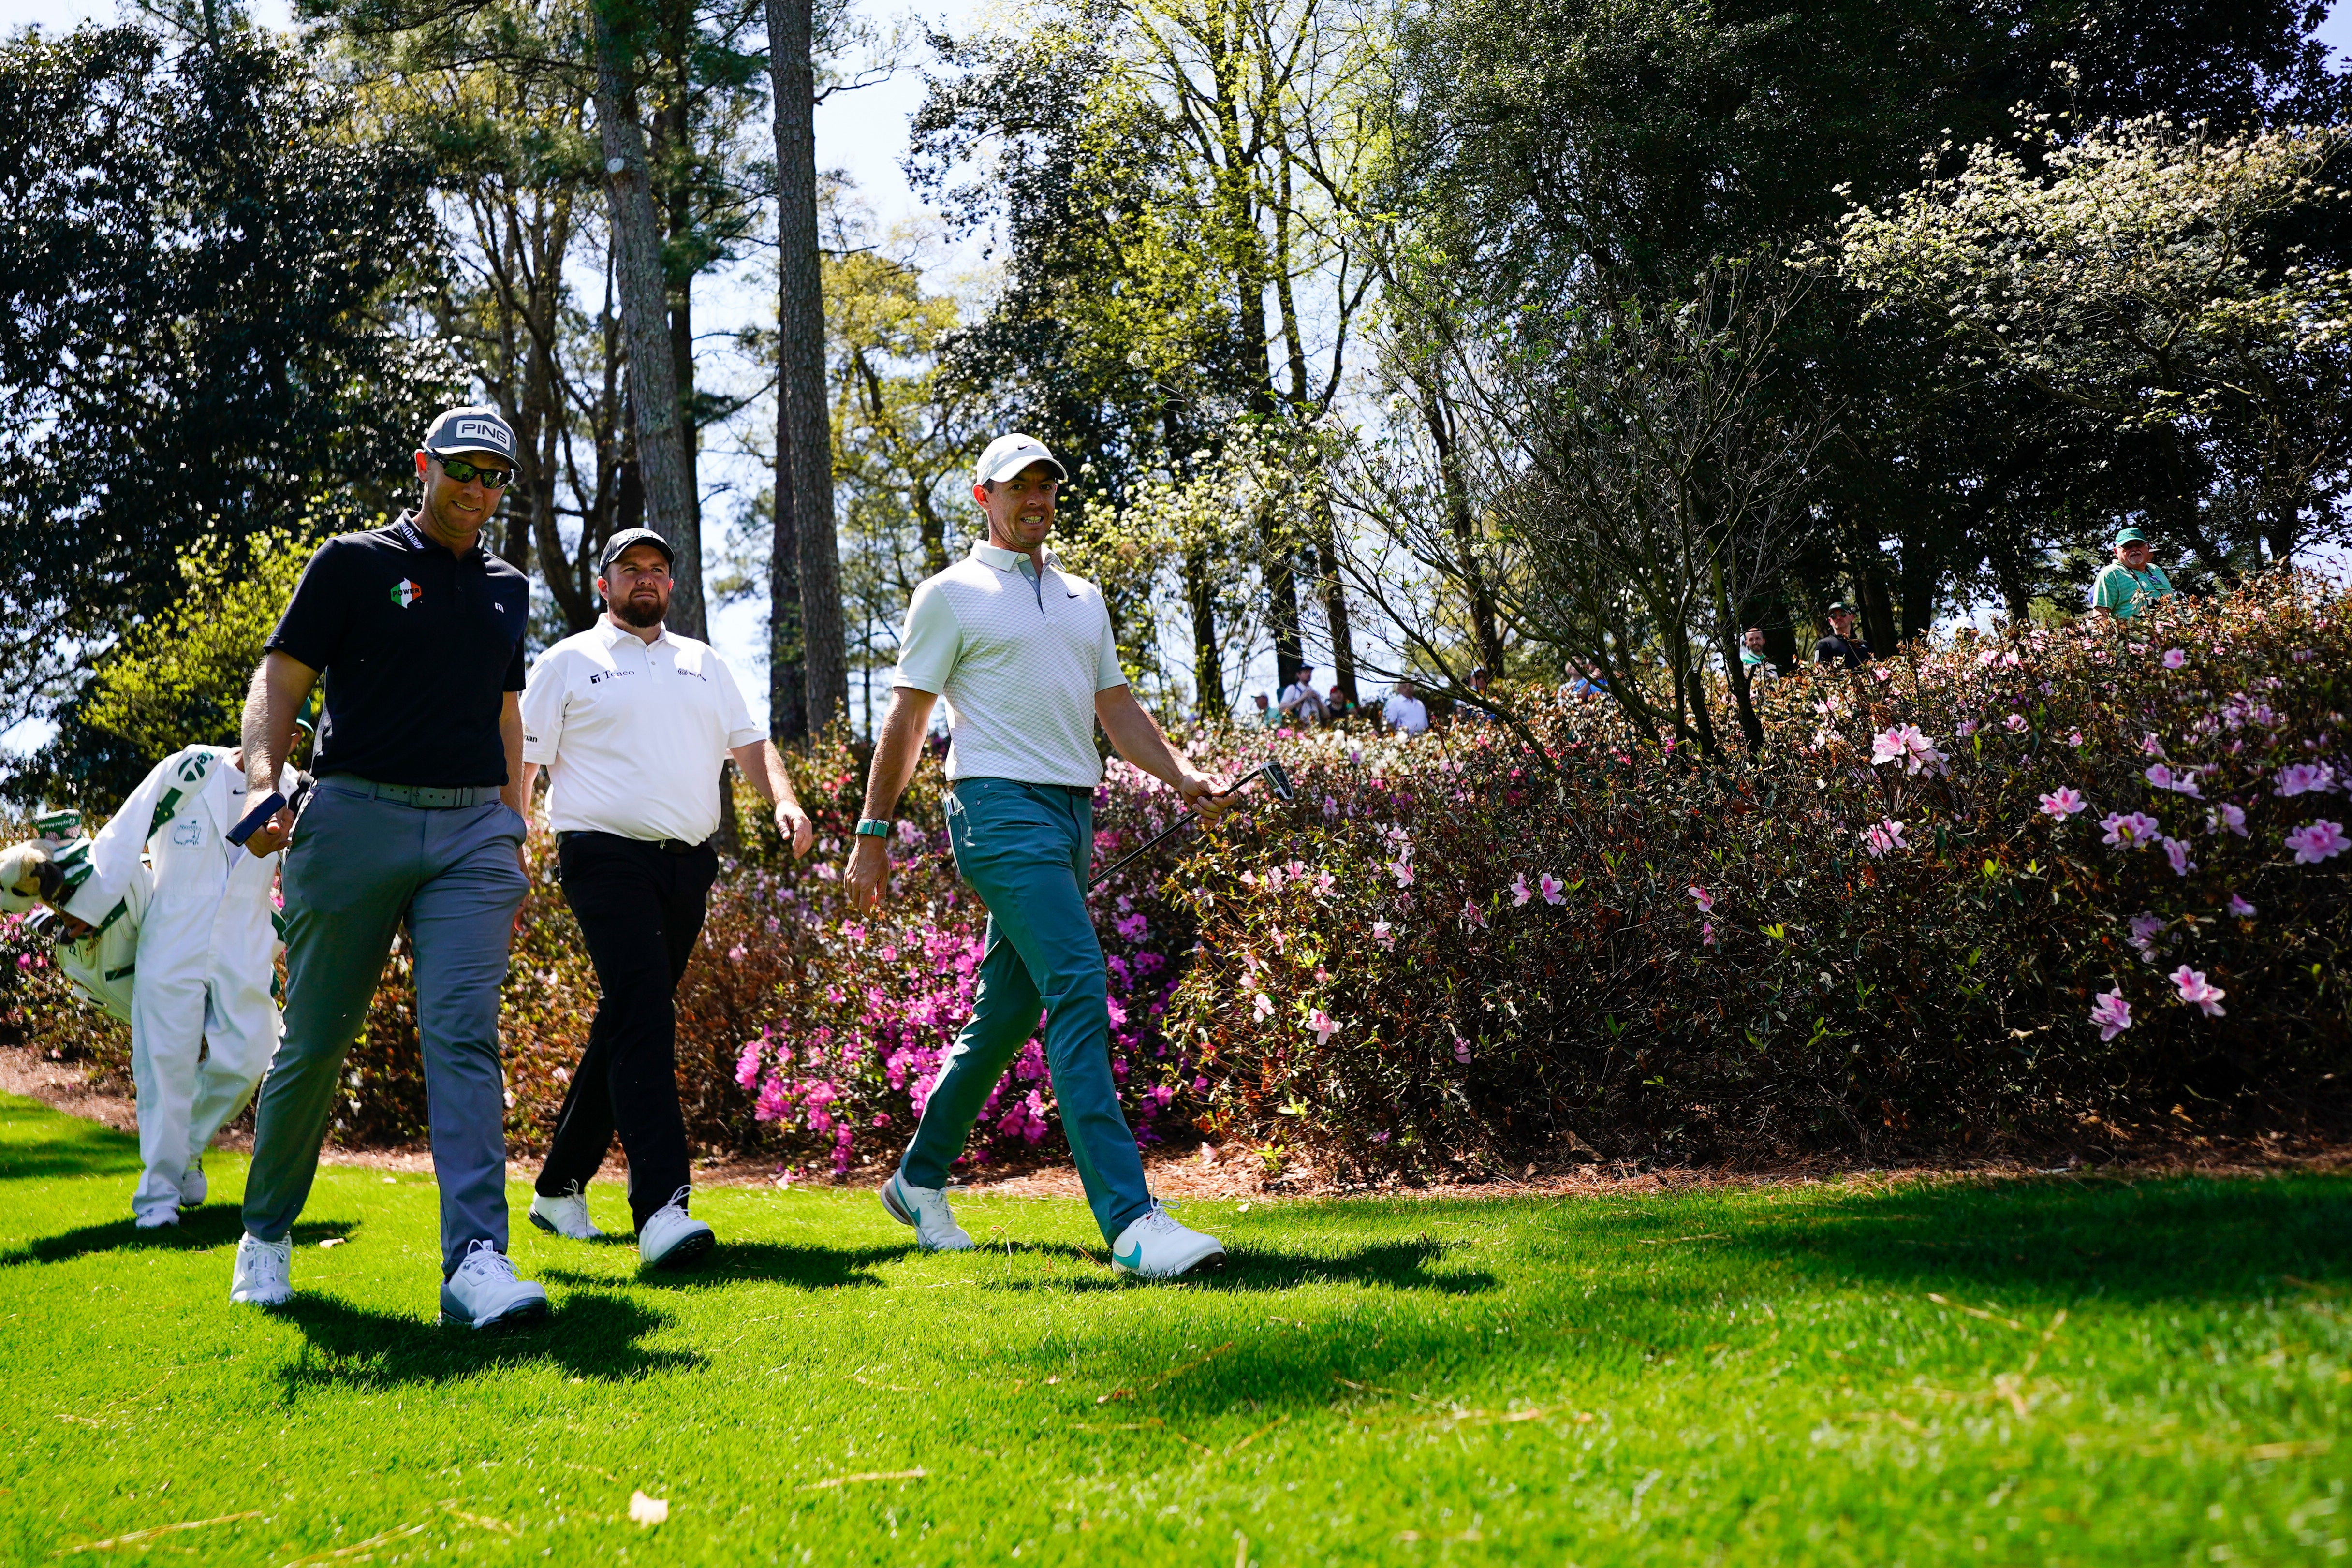 From left, Seamus Power, Shane Lowry and Rory McIlroy walk down the sixth hole during a practice round for the Masters (Matt Slocum/AP)